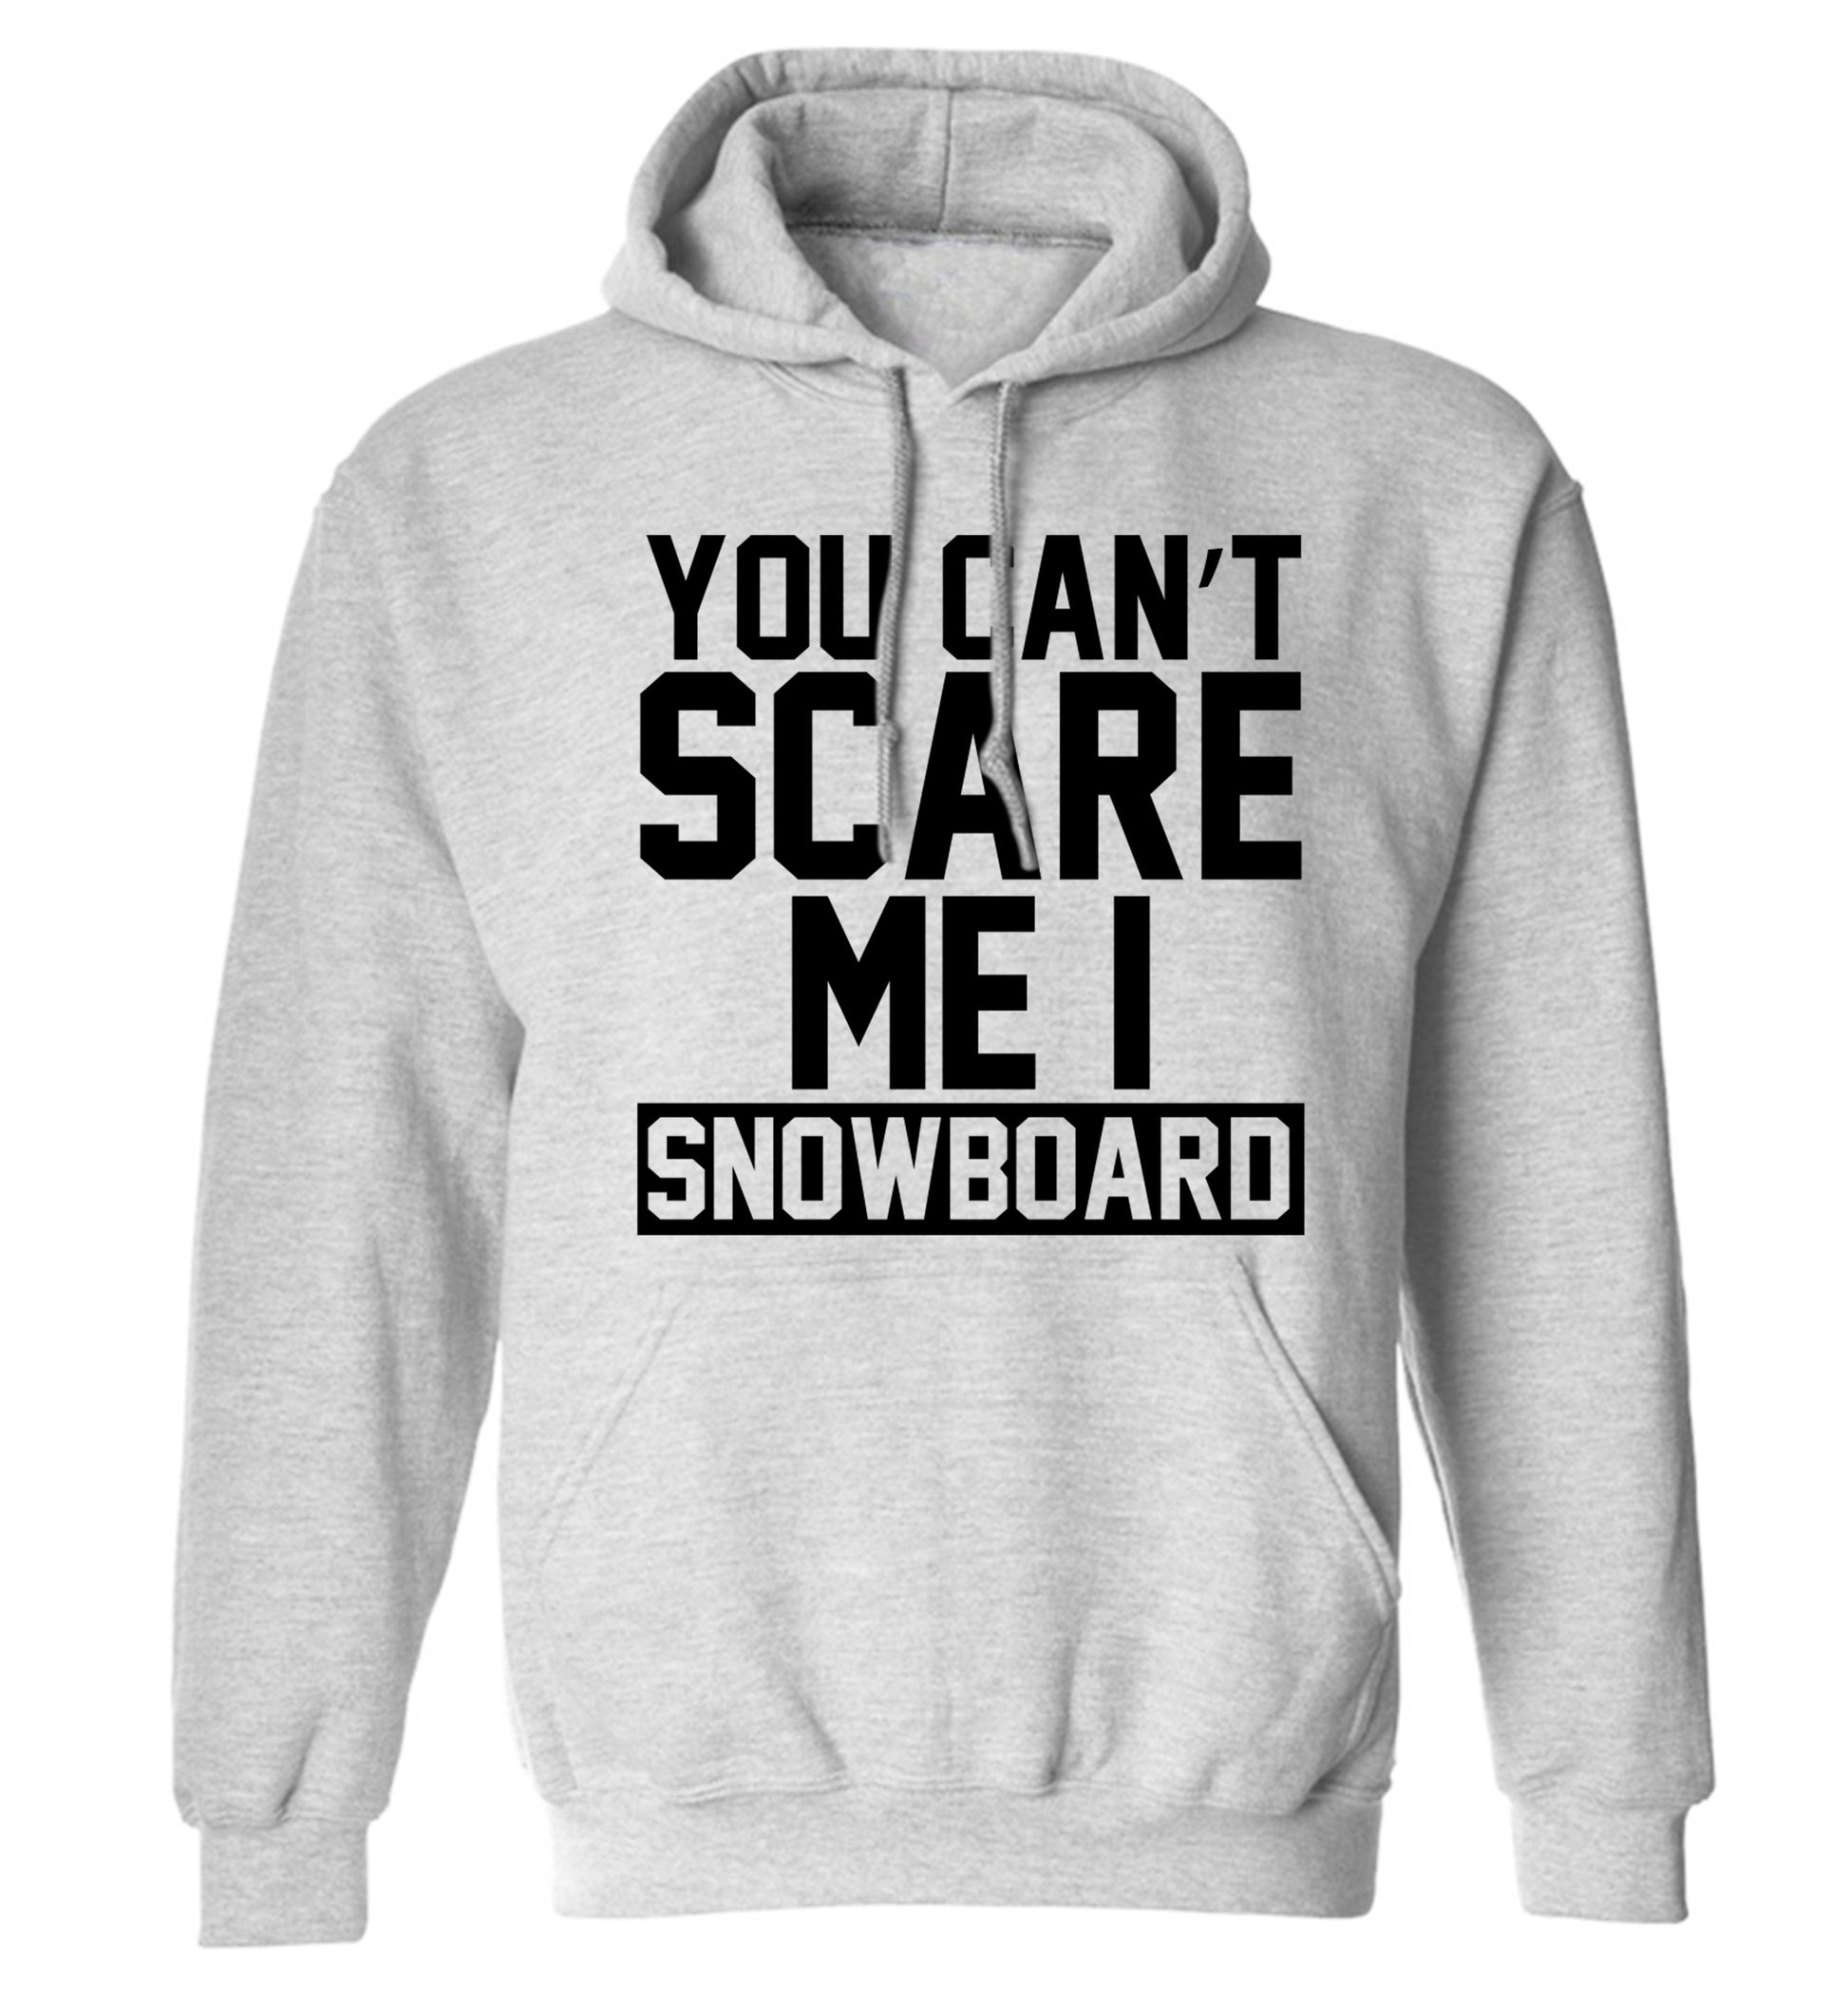 You can't scare me I snowboard adults unisex grey hoodie 2XL